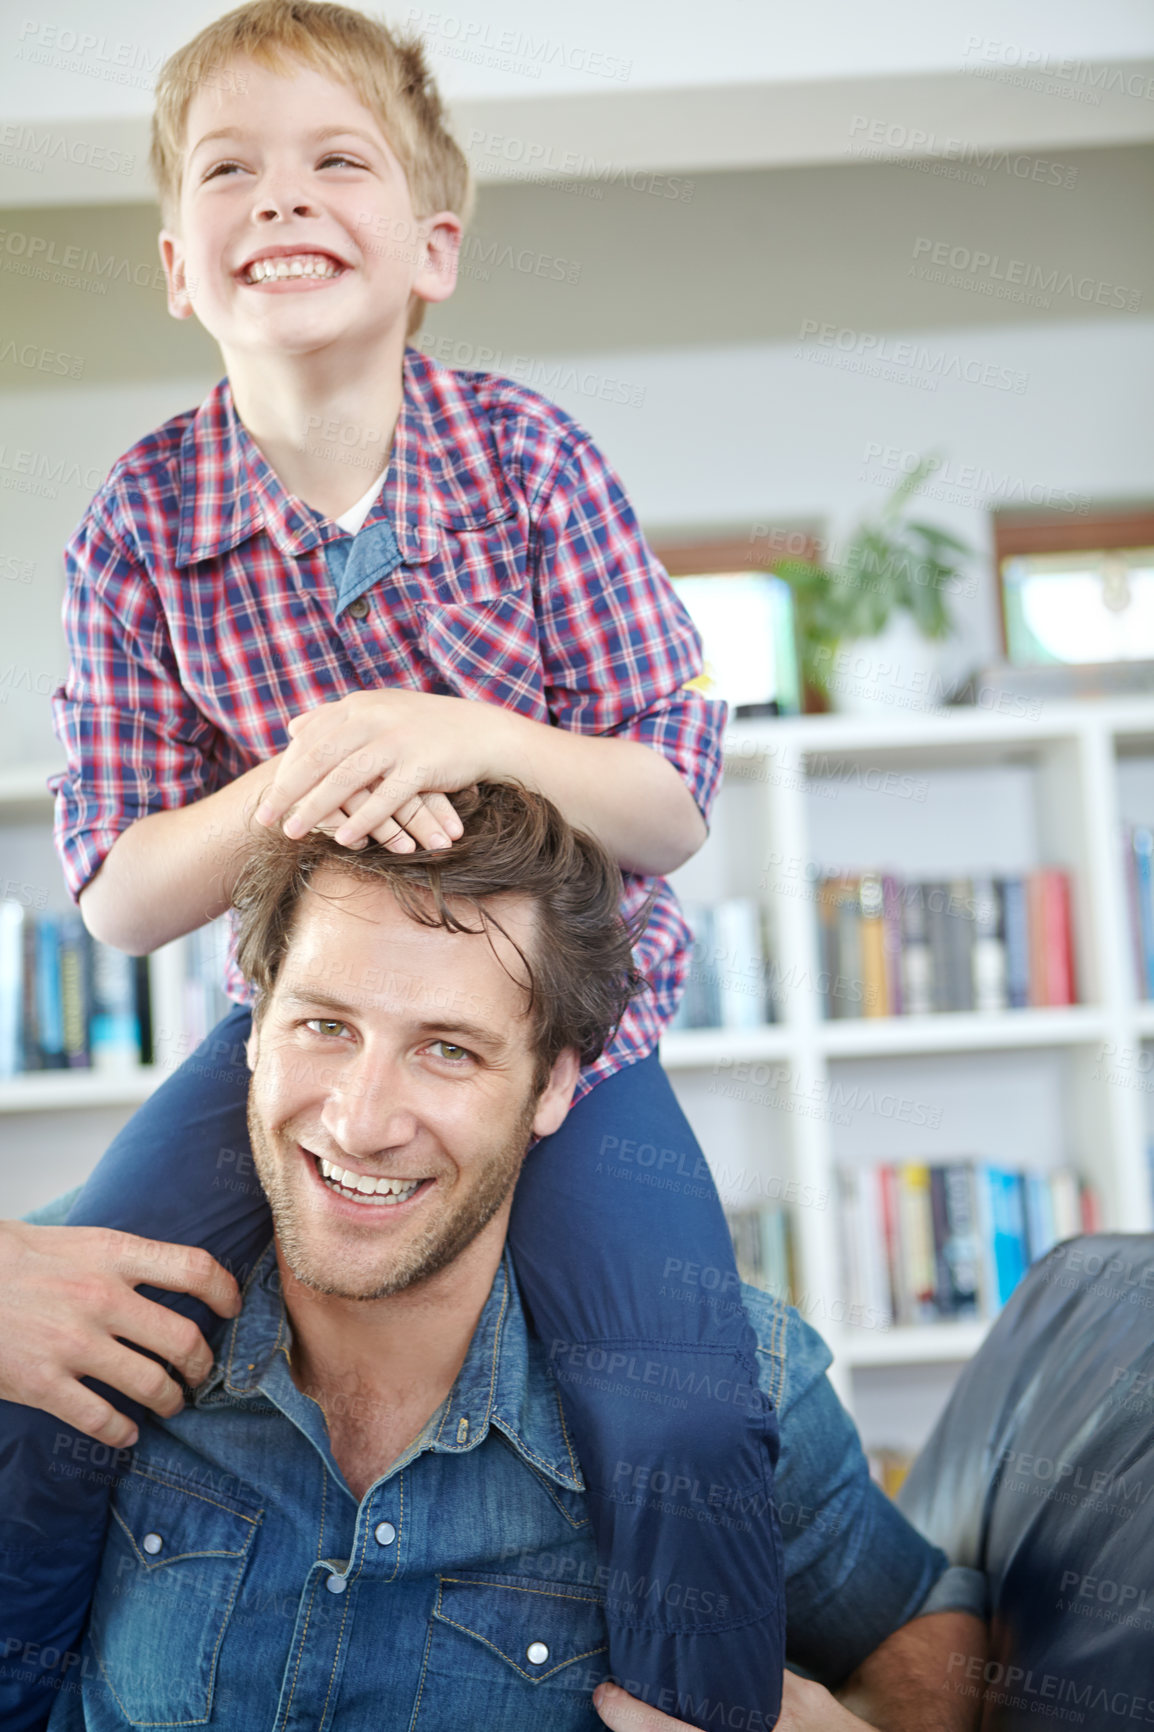 Buy stock photo Shot of a little boy sitting on his father's shoulders